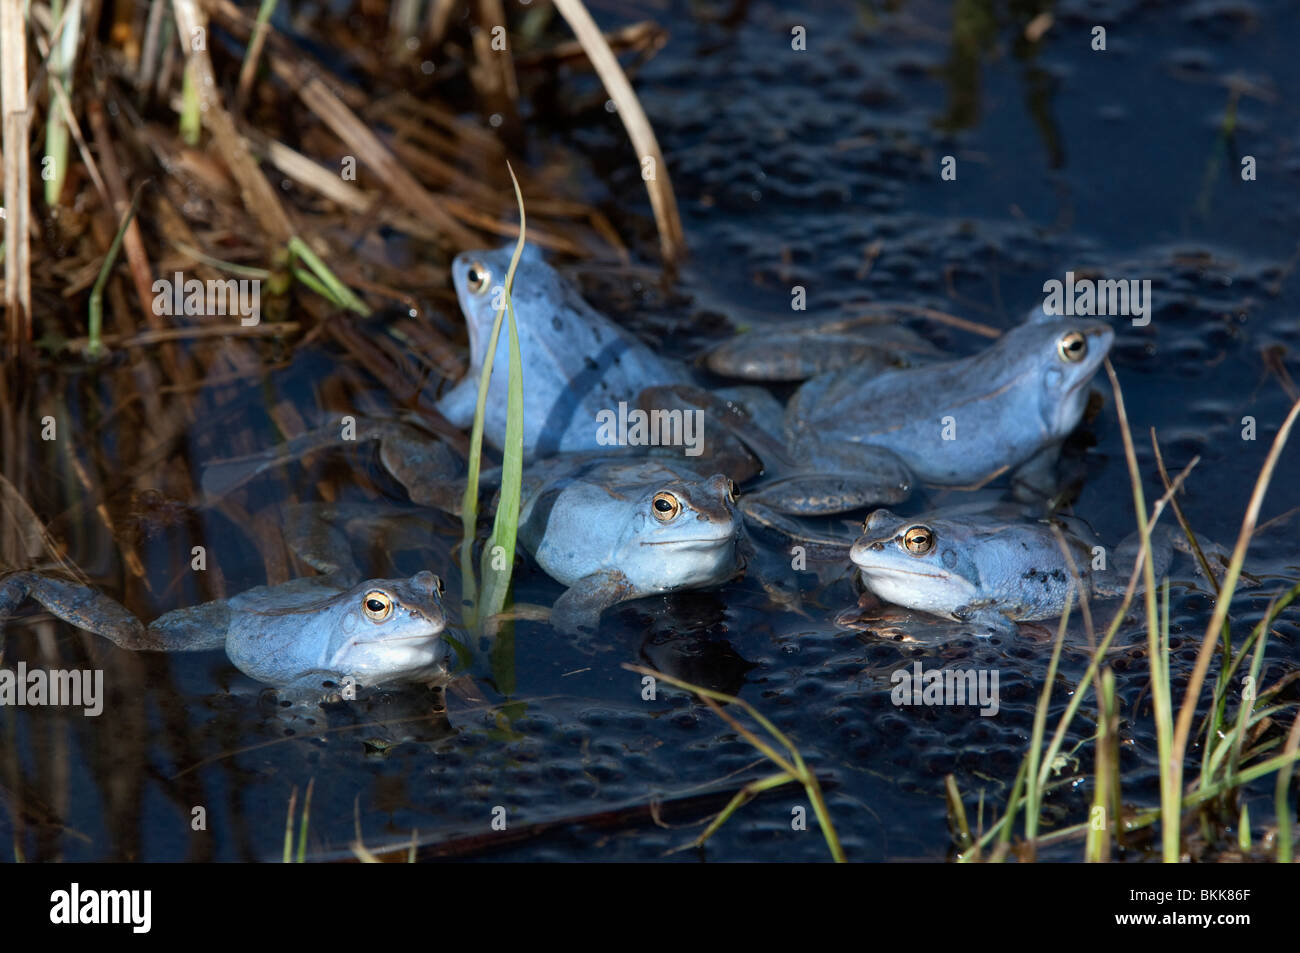 Moor Frog (Rana arvalis), five blue colored males in shallow water. Stock Photo